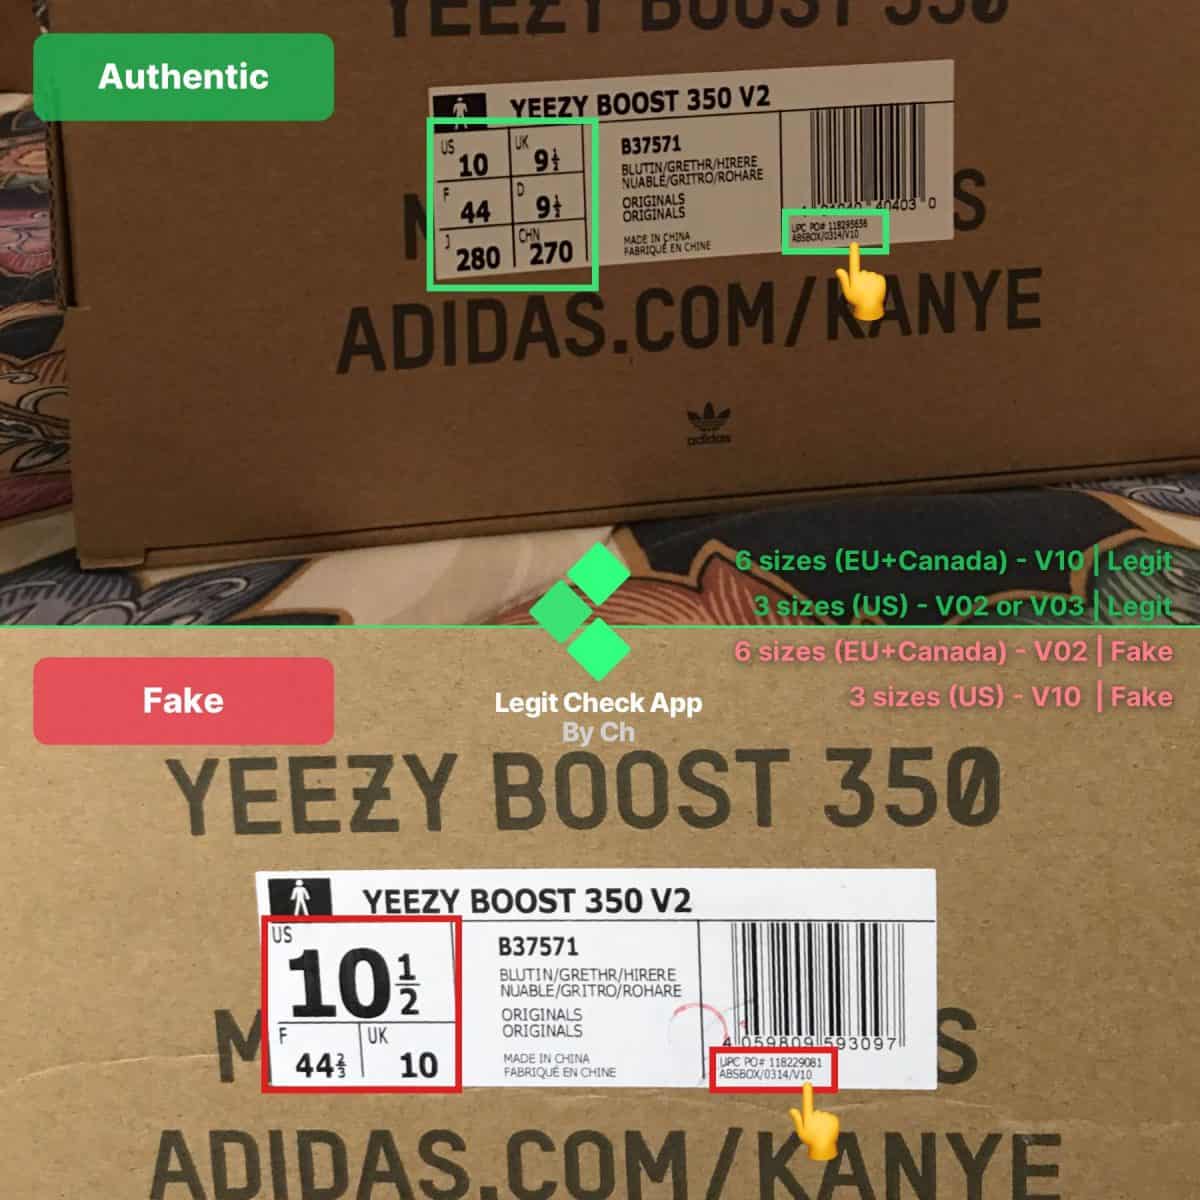 Yeezy Boost 350 V2 Blue Tint Box Label Fake Vs Real